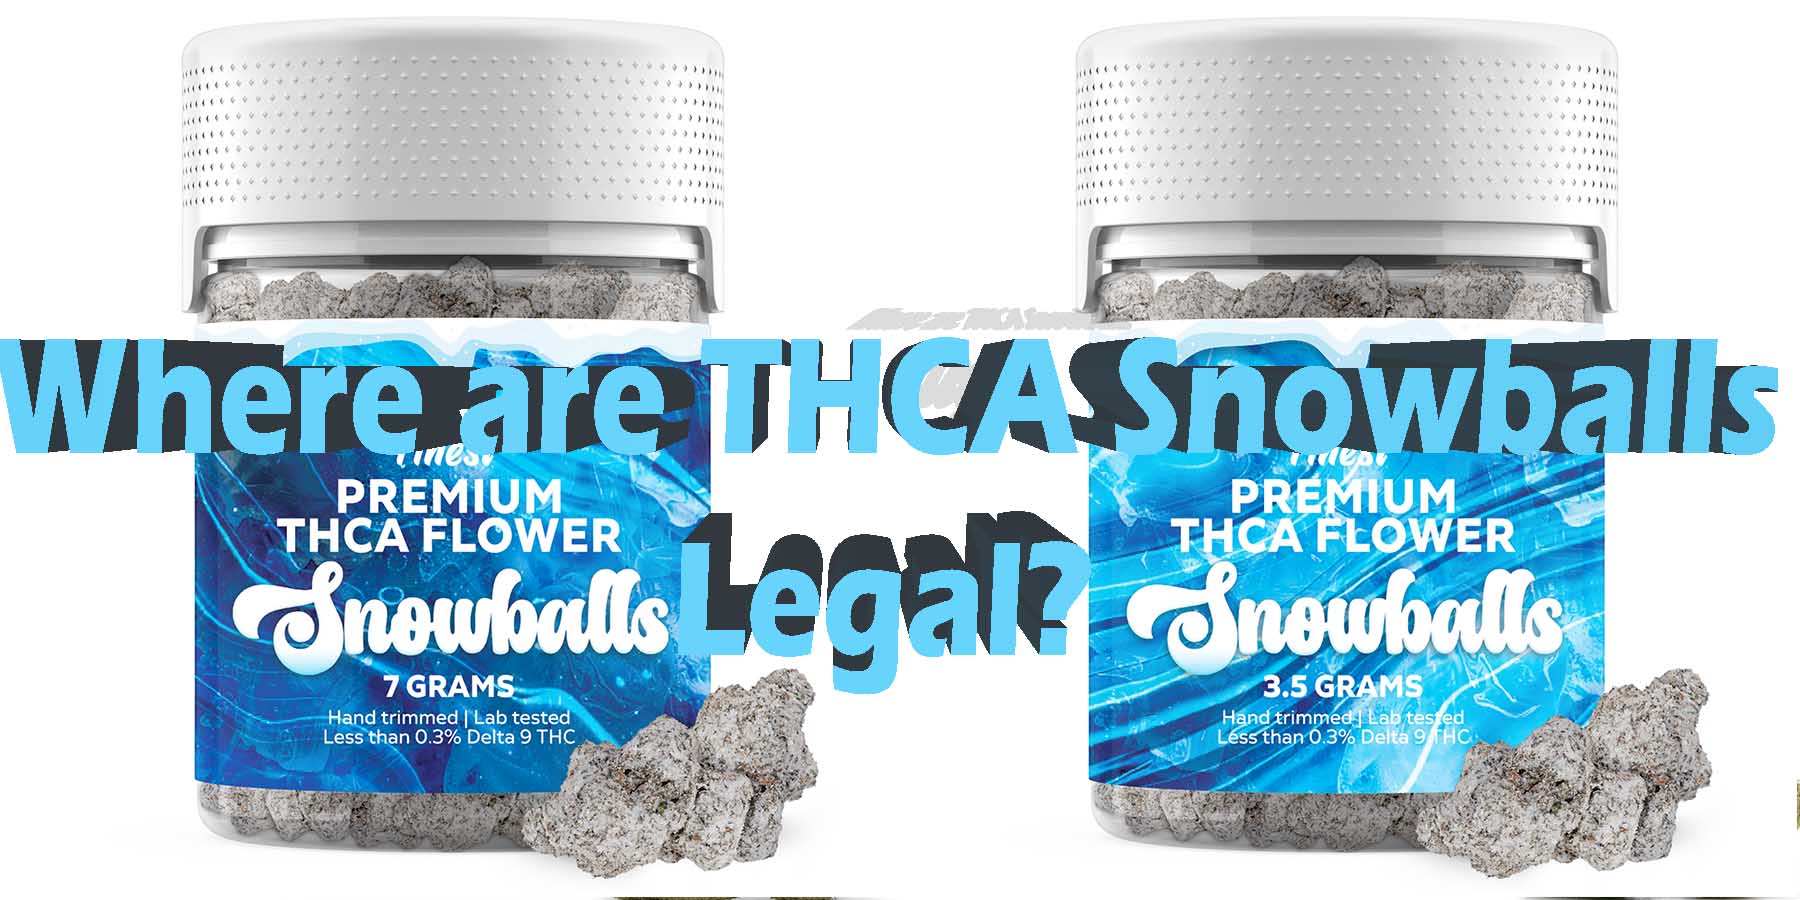 Where are THCA Snowballs Legal THC LowestPrice Coupon Discount For Smoking Best High Smoke Shop Online Near Me Online Smoke Shop StrongestBrand Best Smoke Best Price Bloomz